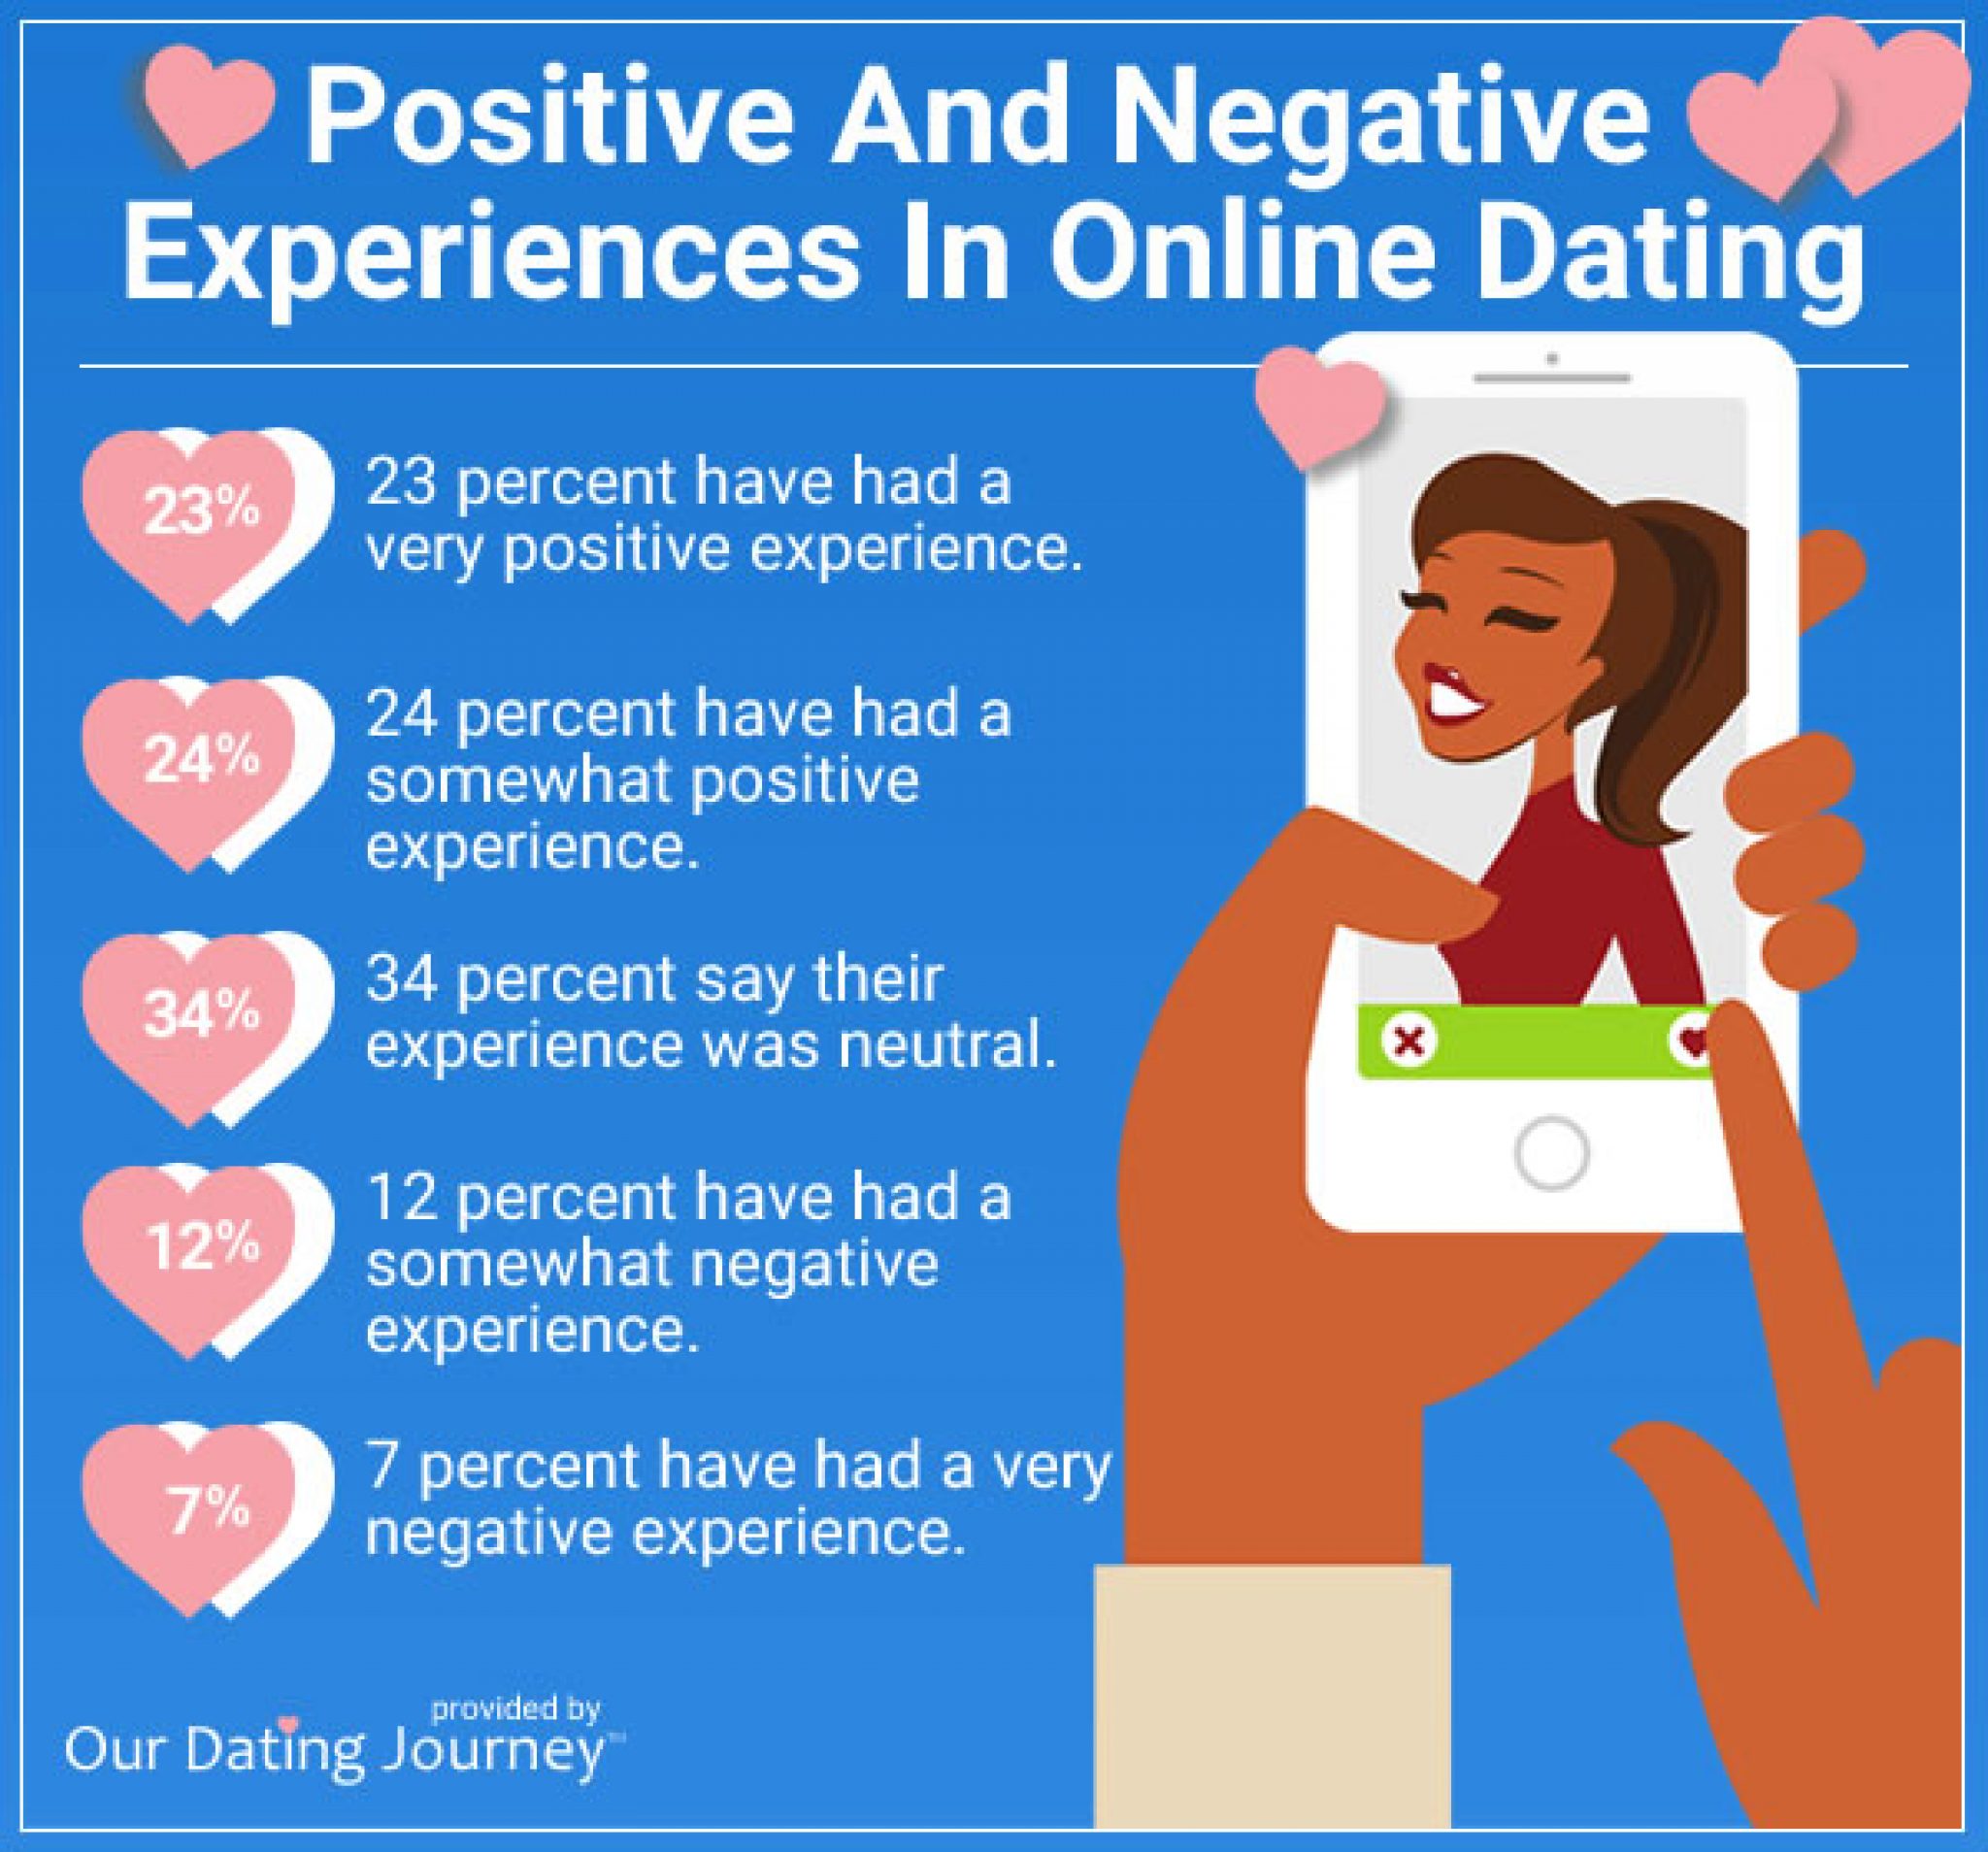 Growing popularity of online dating services - City-Data Blog